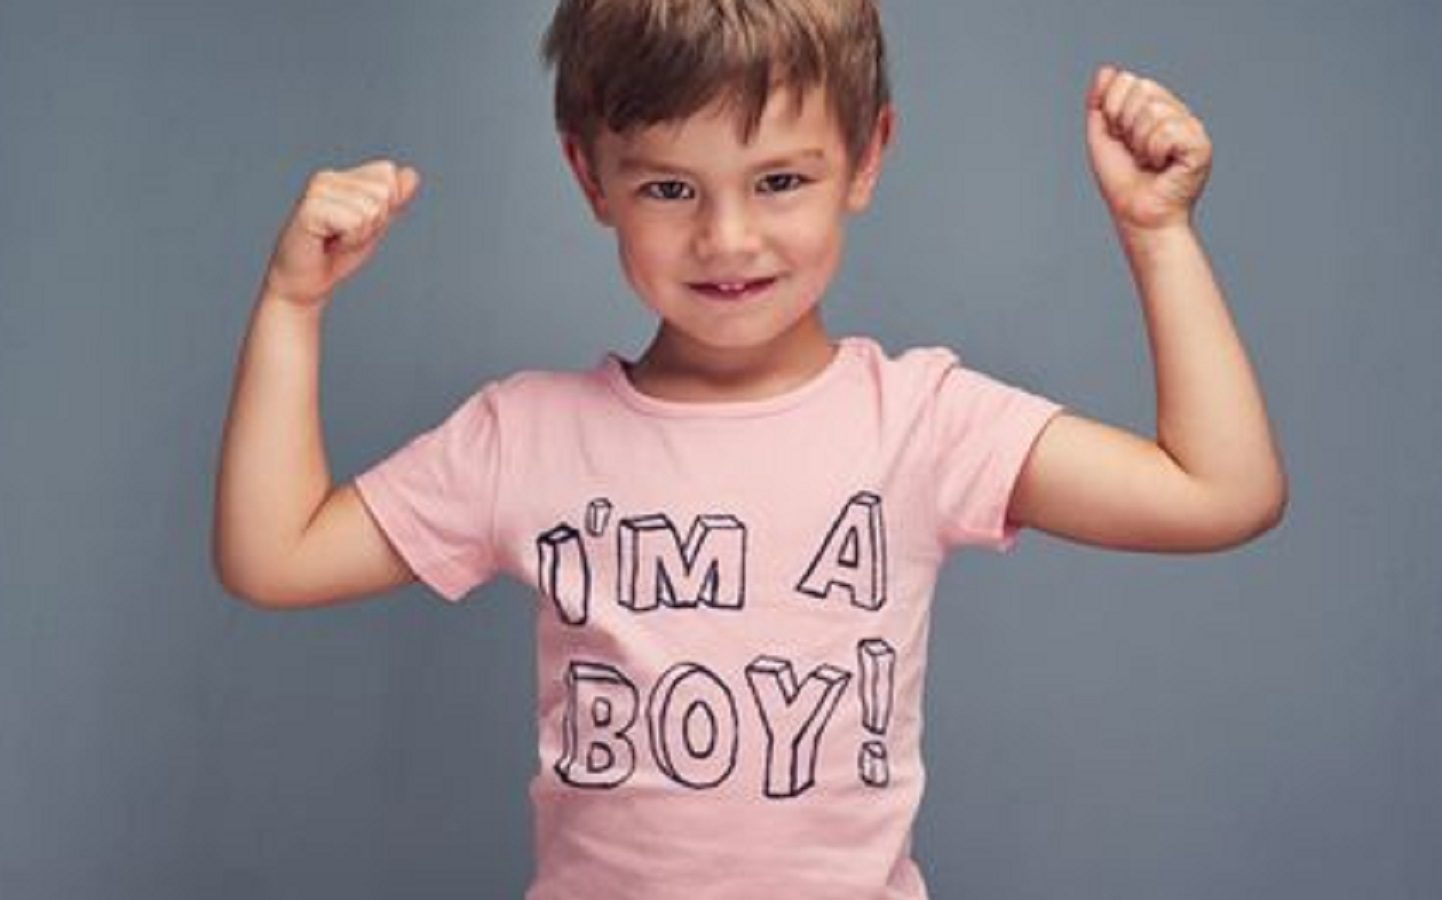 Texas Bill Will Label Parents Getting Sex Change Hormones and Surgeries for Their Children as Child Abuse | The Gateway Pundit | by Cassandra MacDonald